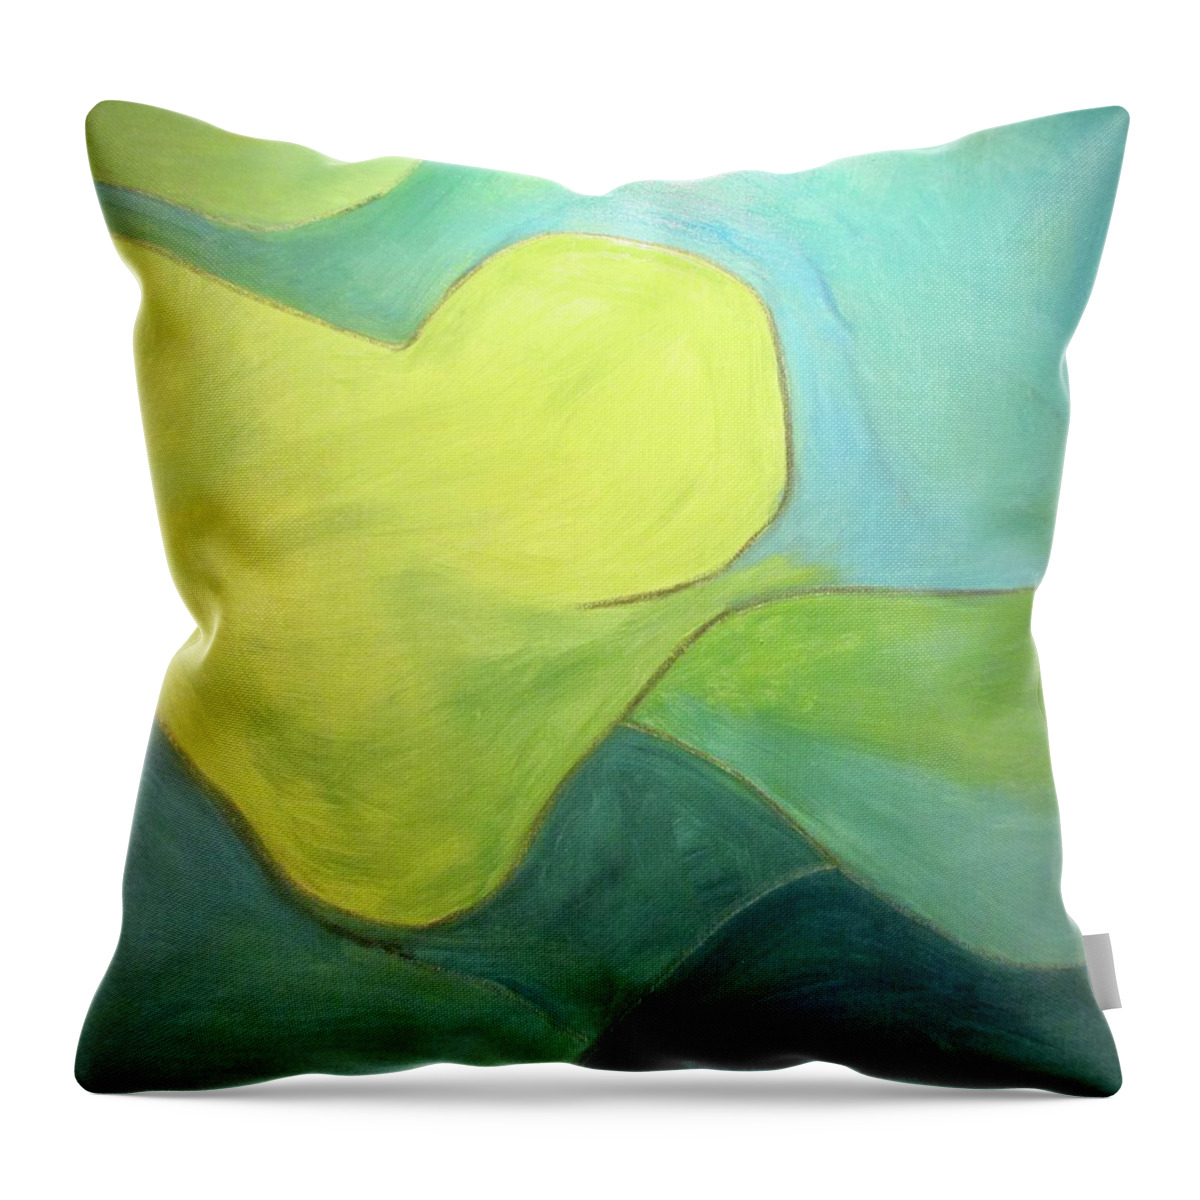 Blue Throw Pillow featuring the painting Following by Steven Miller